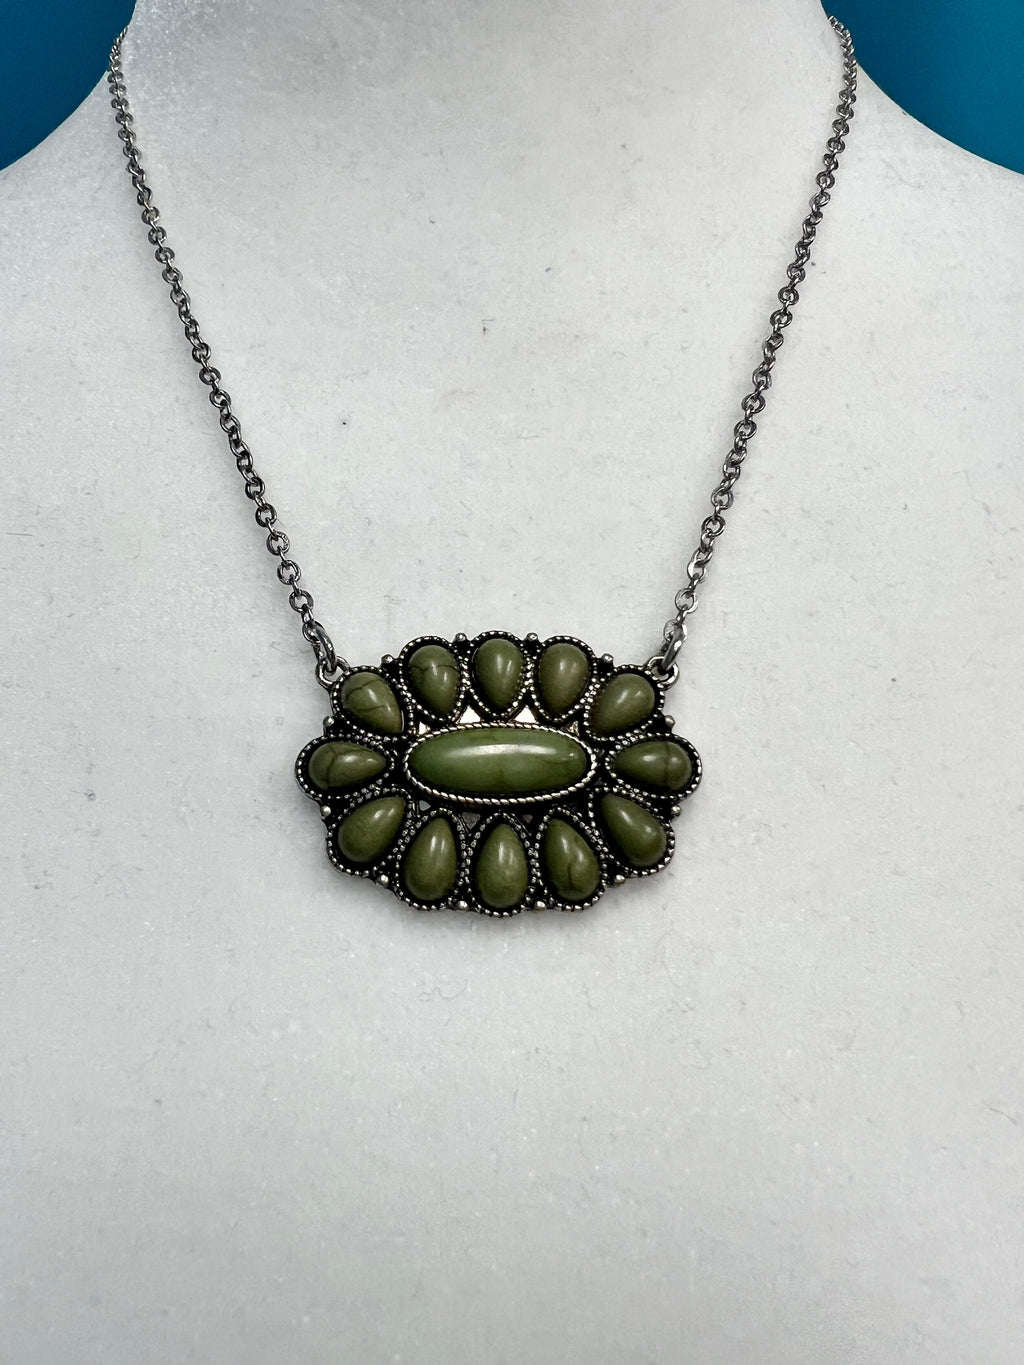 Our Olive Squash Necklace will have you looking stylishly wild. With its Western-inspired design and a round stone pendant accentuated with olive green stones, this silver necklace will add a fierce touch to your wardrobe. Not to mention, its charm size of 2", 18"chain with 3" extender will fit you perfectly. Get ready to hit the town in the ultimate fashion statement—nickle free!